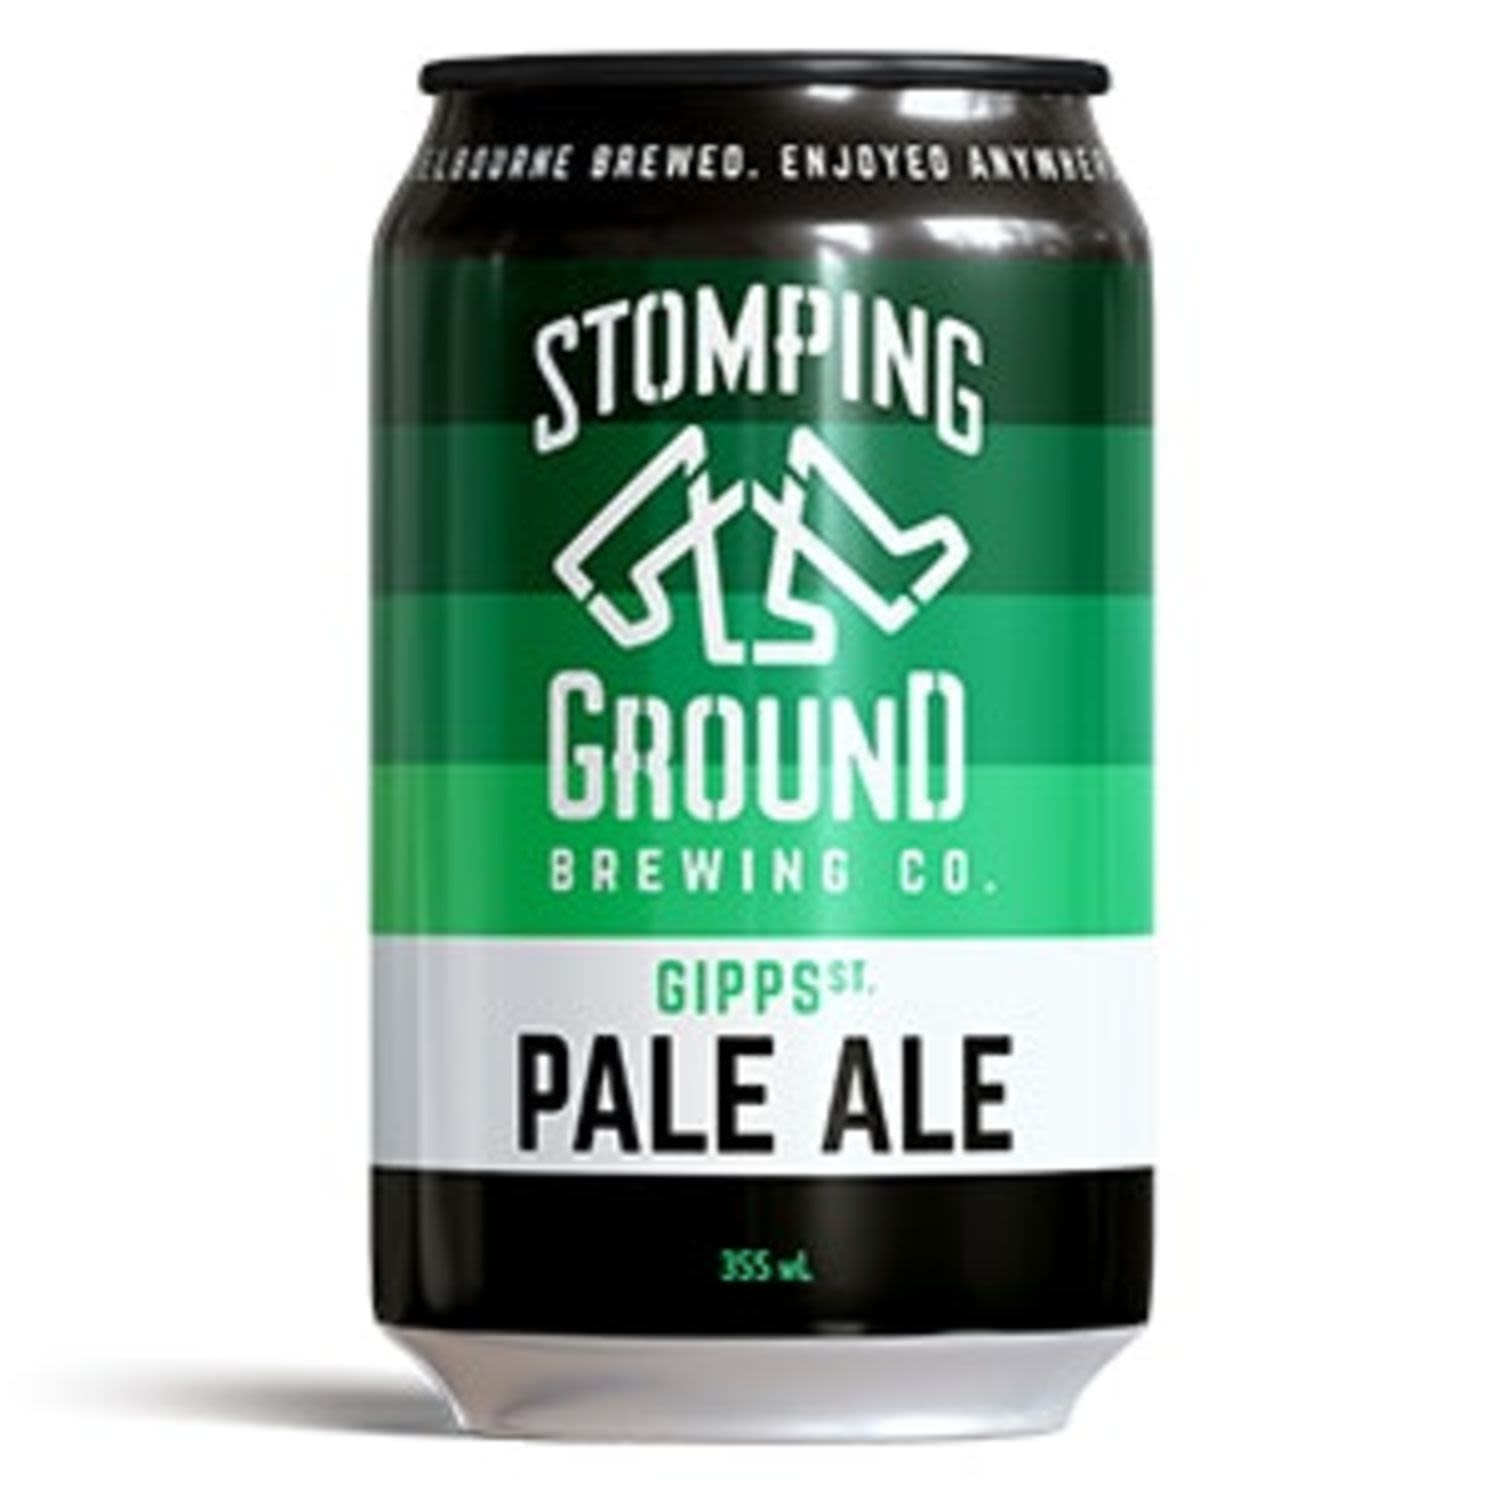 Stomping Ground Gipps St Pale Ale 355mL 24 Pack